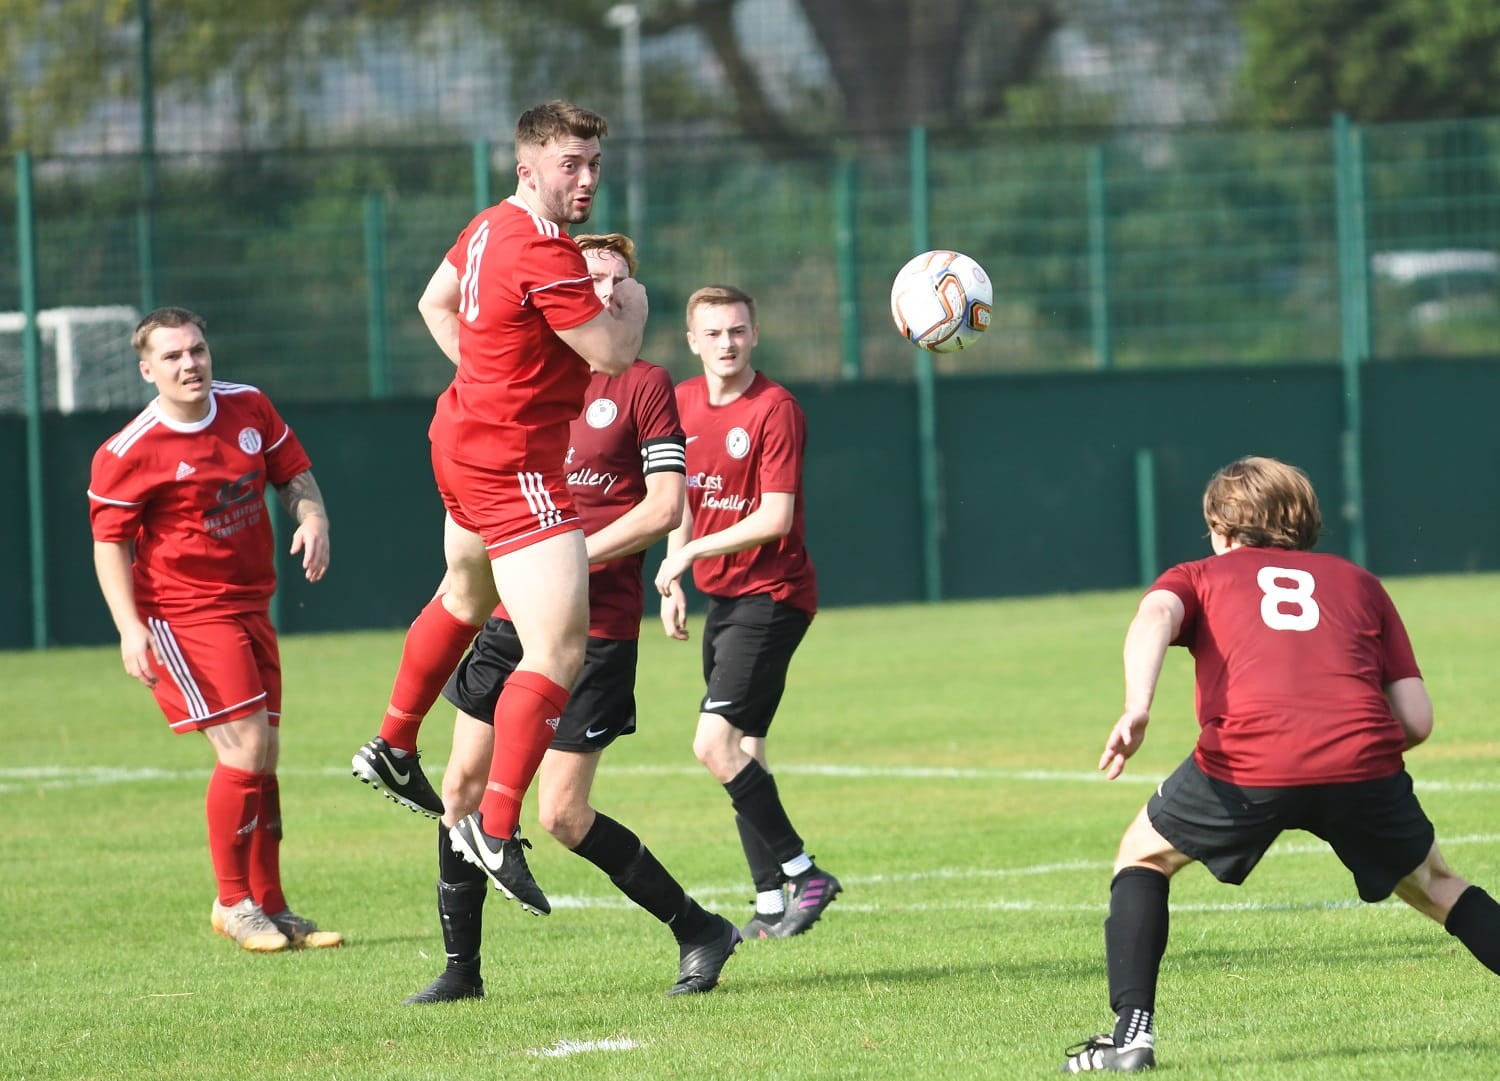 WEEK 3 REVIEW: Round-up of all the league and county cup action from the weekend